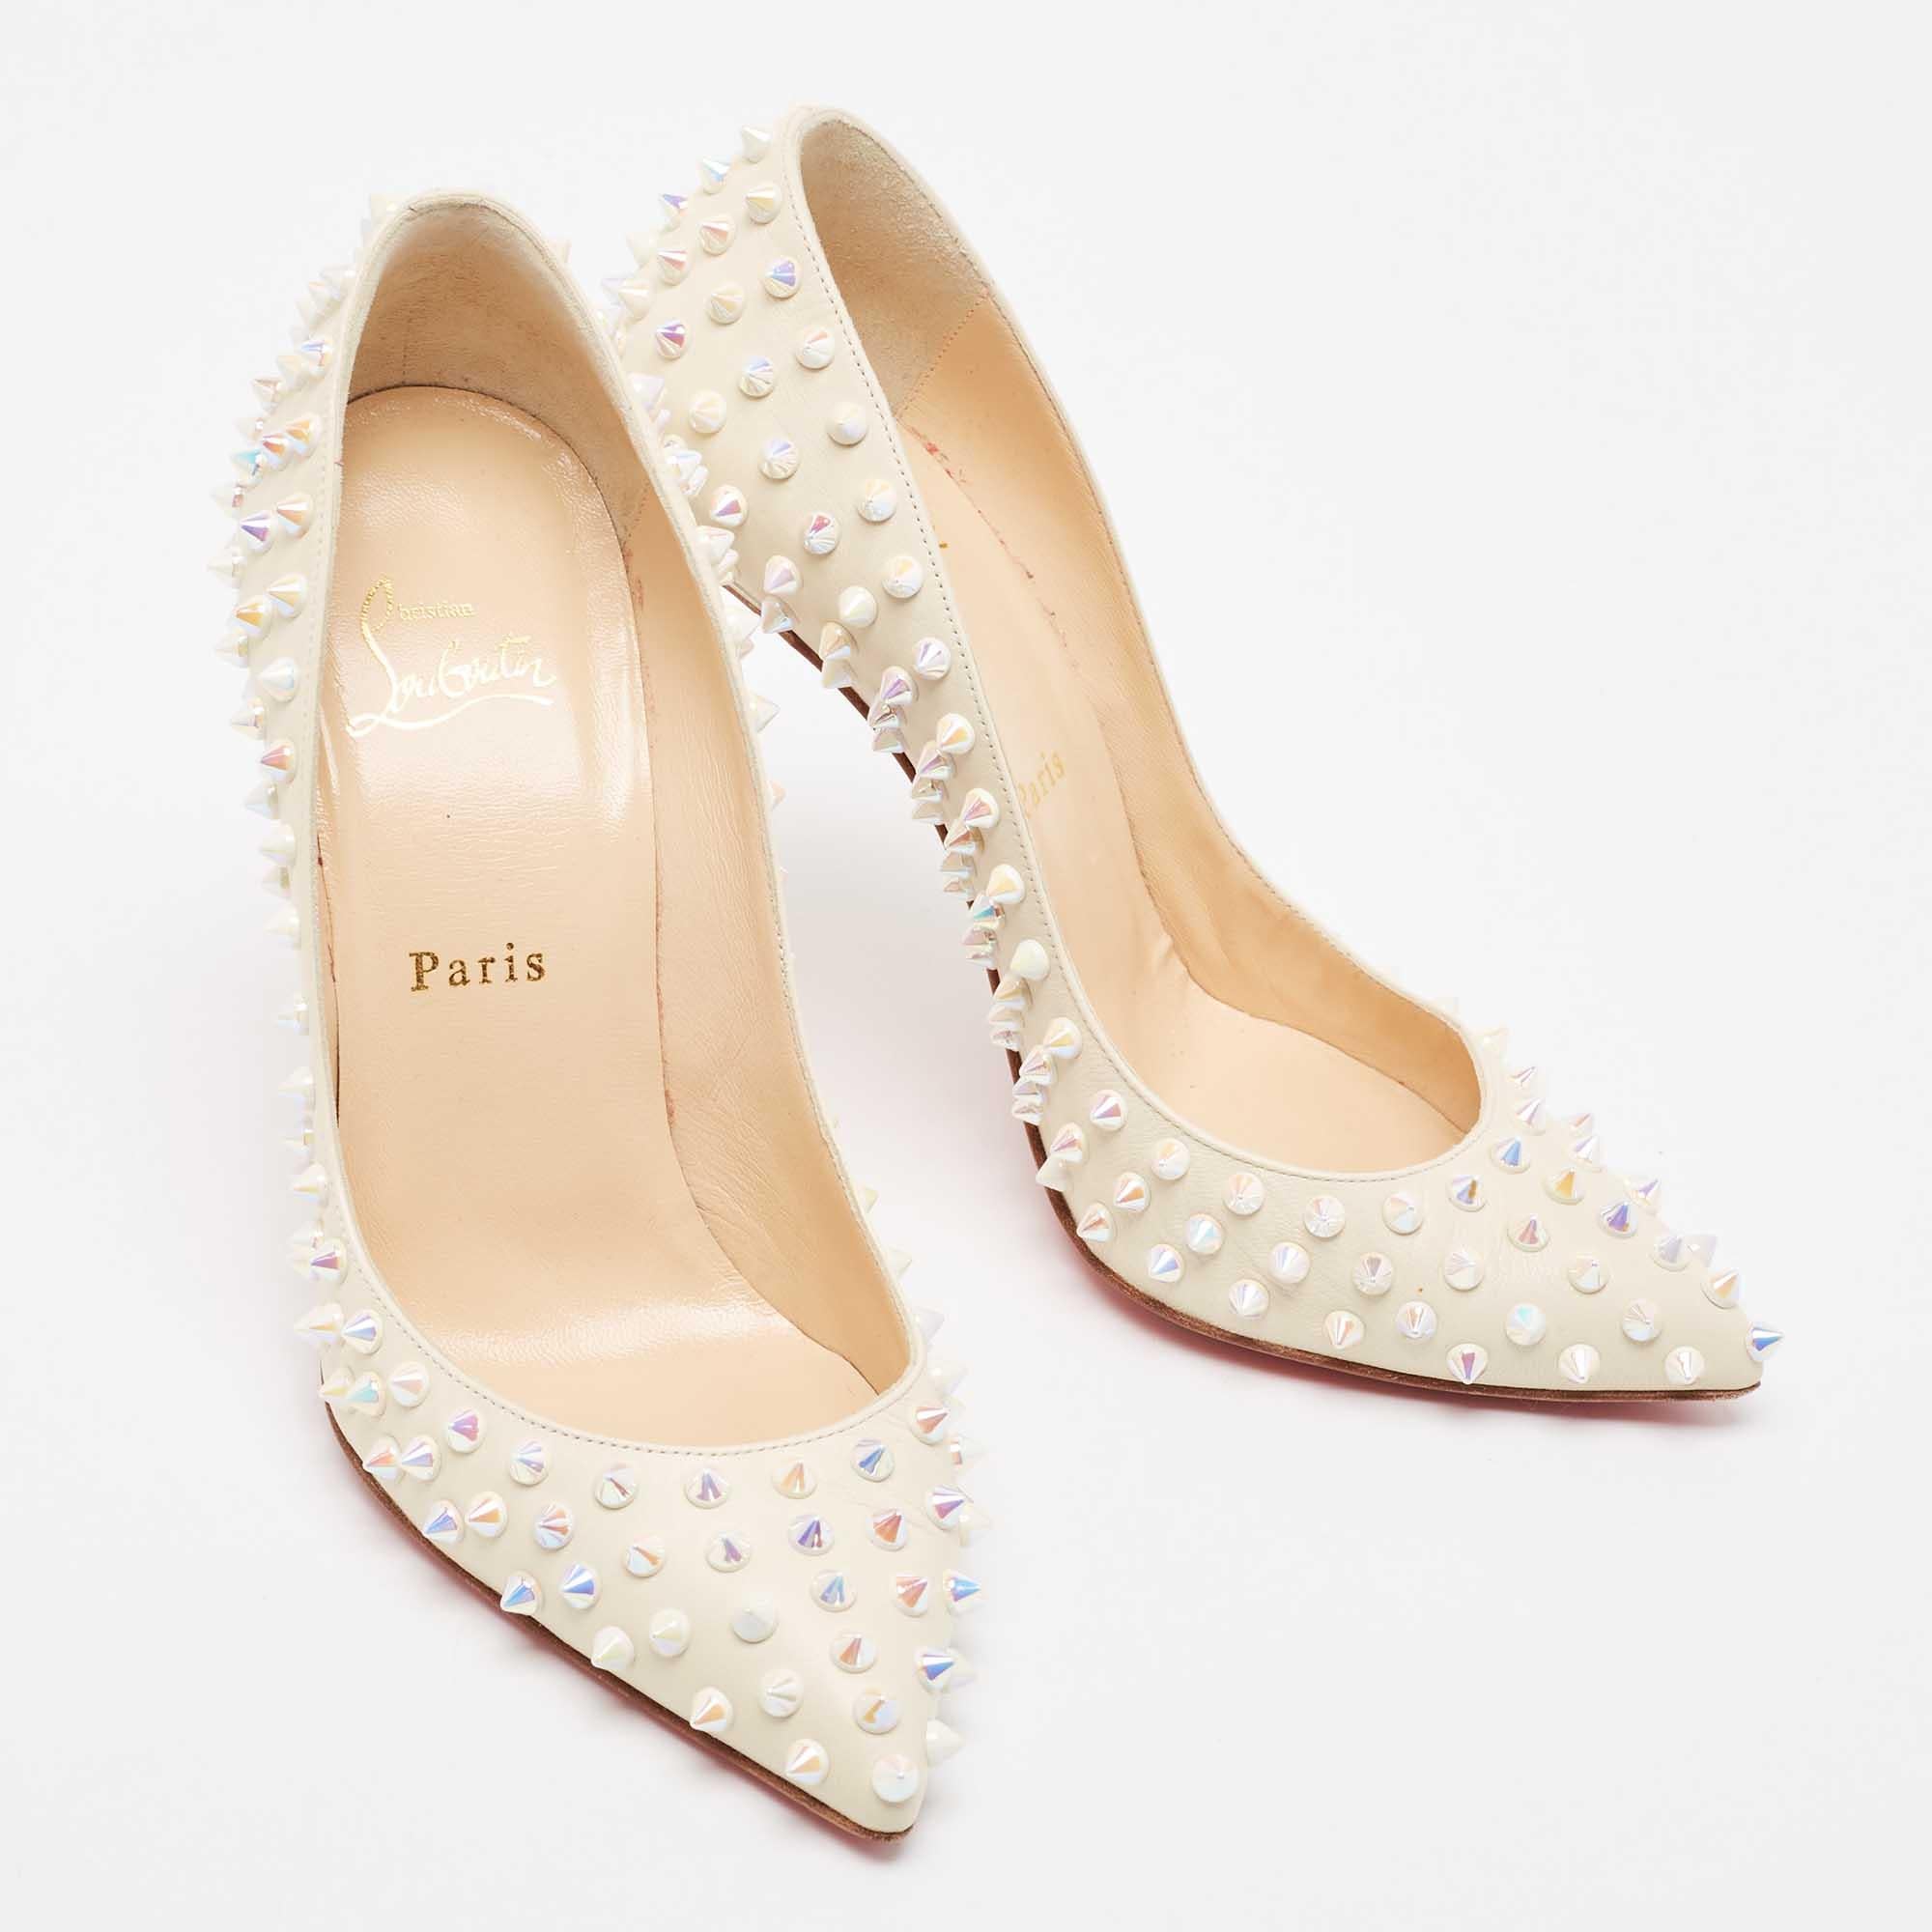 Beige Christian Louboutin Cream Leather Follies Spikes Pointed Toe Pumps Size 38 For Sale